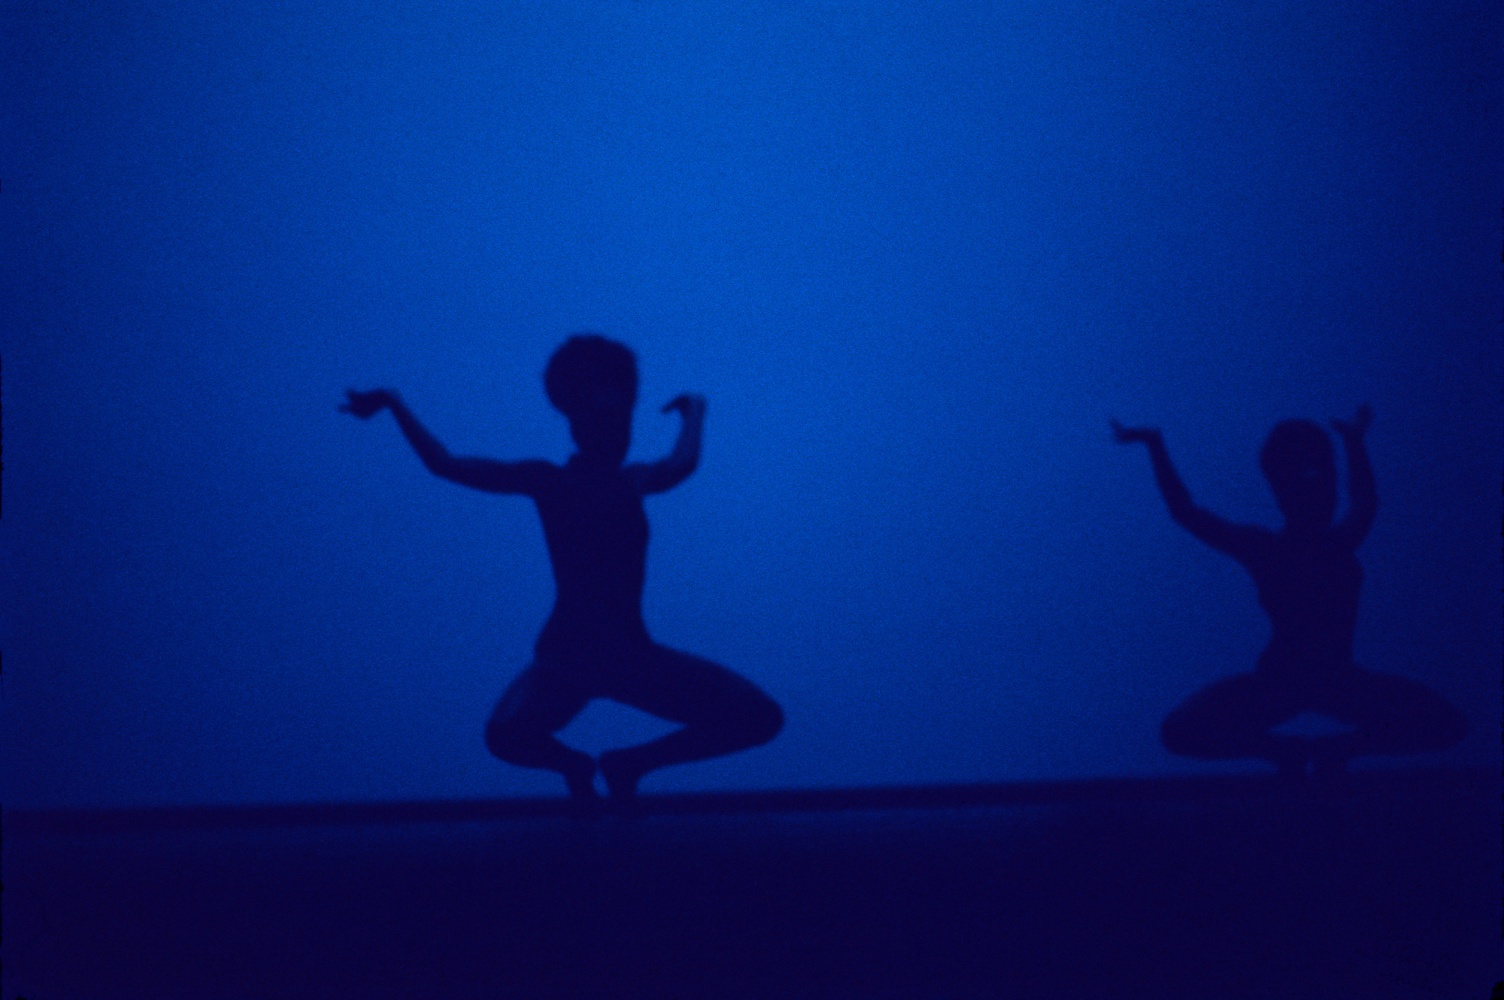 Roy Lewis (b. 1937)
Cuban Dancer in the Blue Light at National Theater, 1977
Archival inkjet print on Simply Elegant Gold Fibre paper
Image: 13 3/4 x 20 inches (34.9 x 50.8 cm) Sheet: 17 x 22 inches (43.2 x 55.9 cm)
Framed: 18 5/8 &amp;times; 25 3/8 &amp;times; 1 1/2 inches (47.3 &amp;times; 64.5 &amp;times; 3.8 cm)
Edition of 5, printed 2023